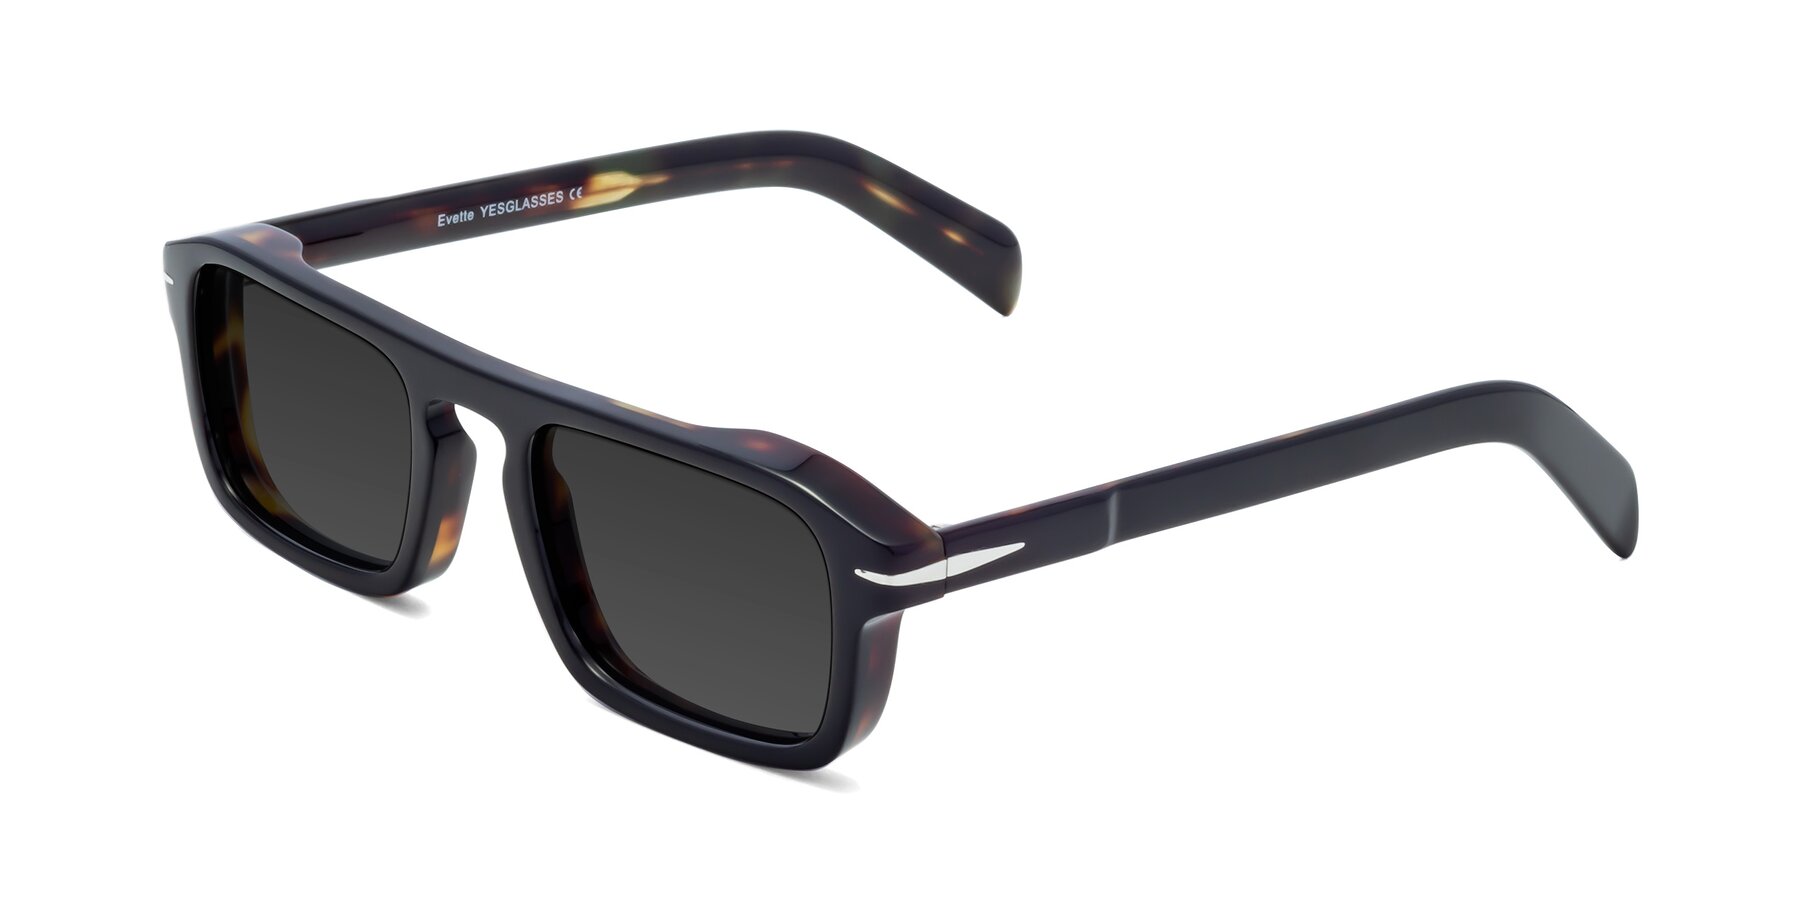 Angle of Evette in Black-Tortoise with Gray Tinted Lenses